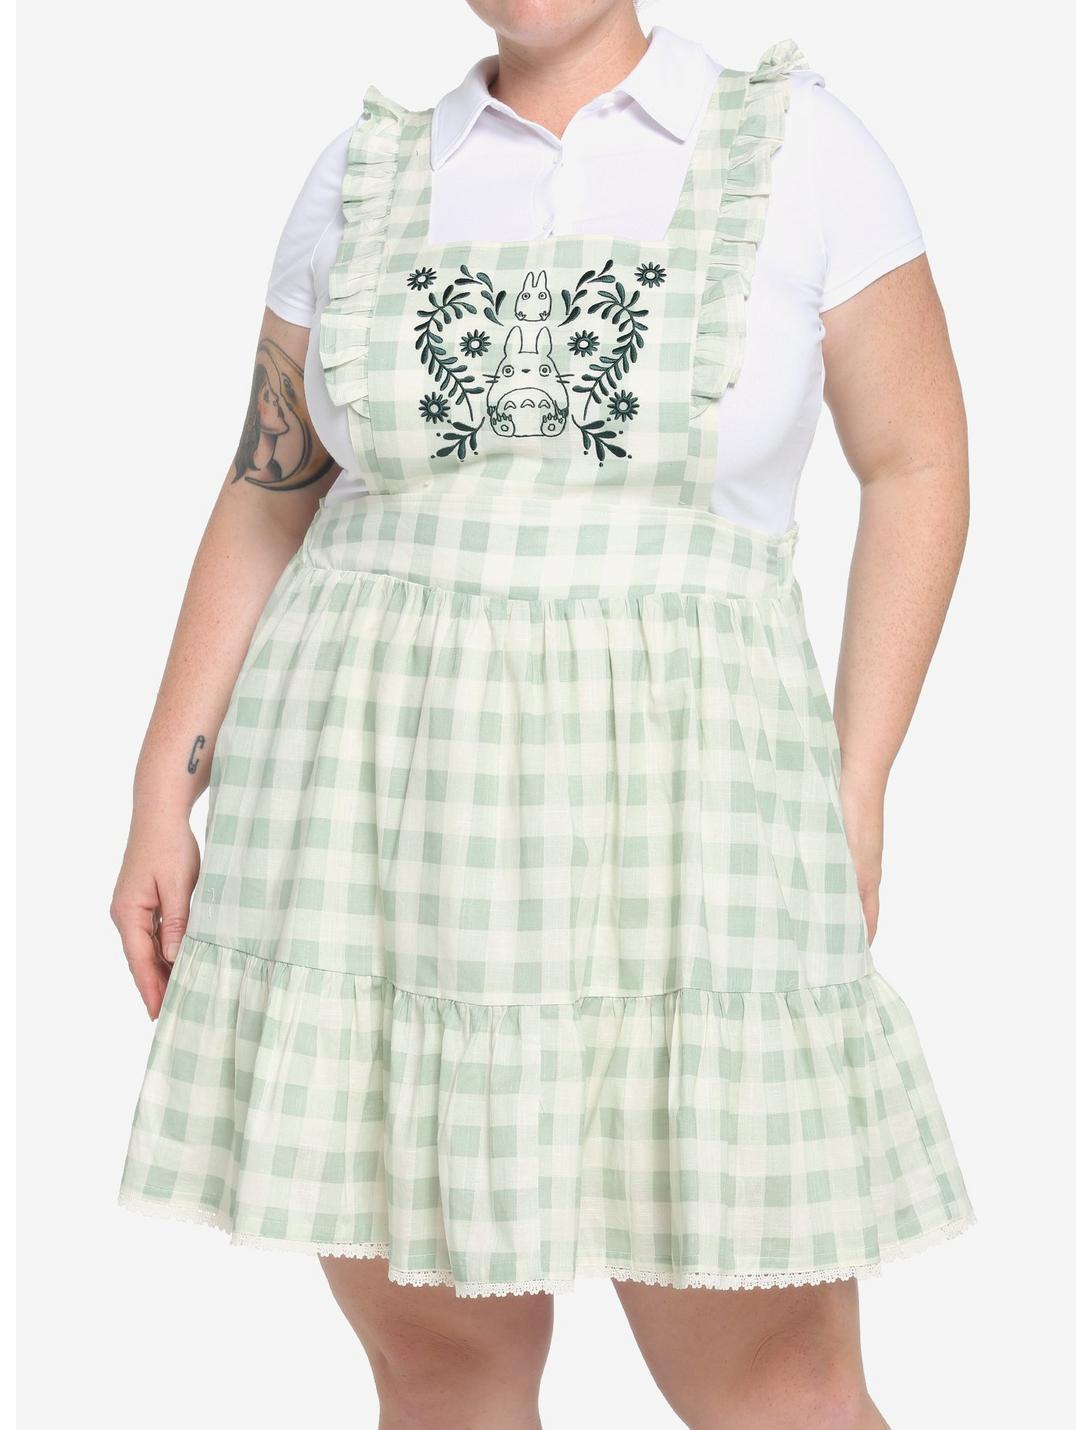 Her Universe My Neighbor Totoro Gingham Pinafore Skirtall Plus Size, MULTI, hi-res